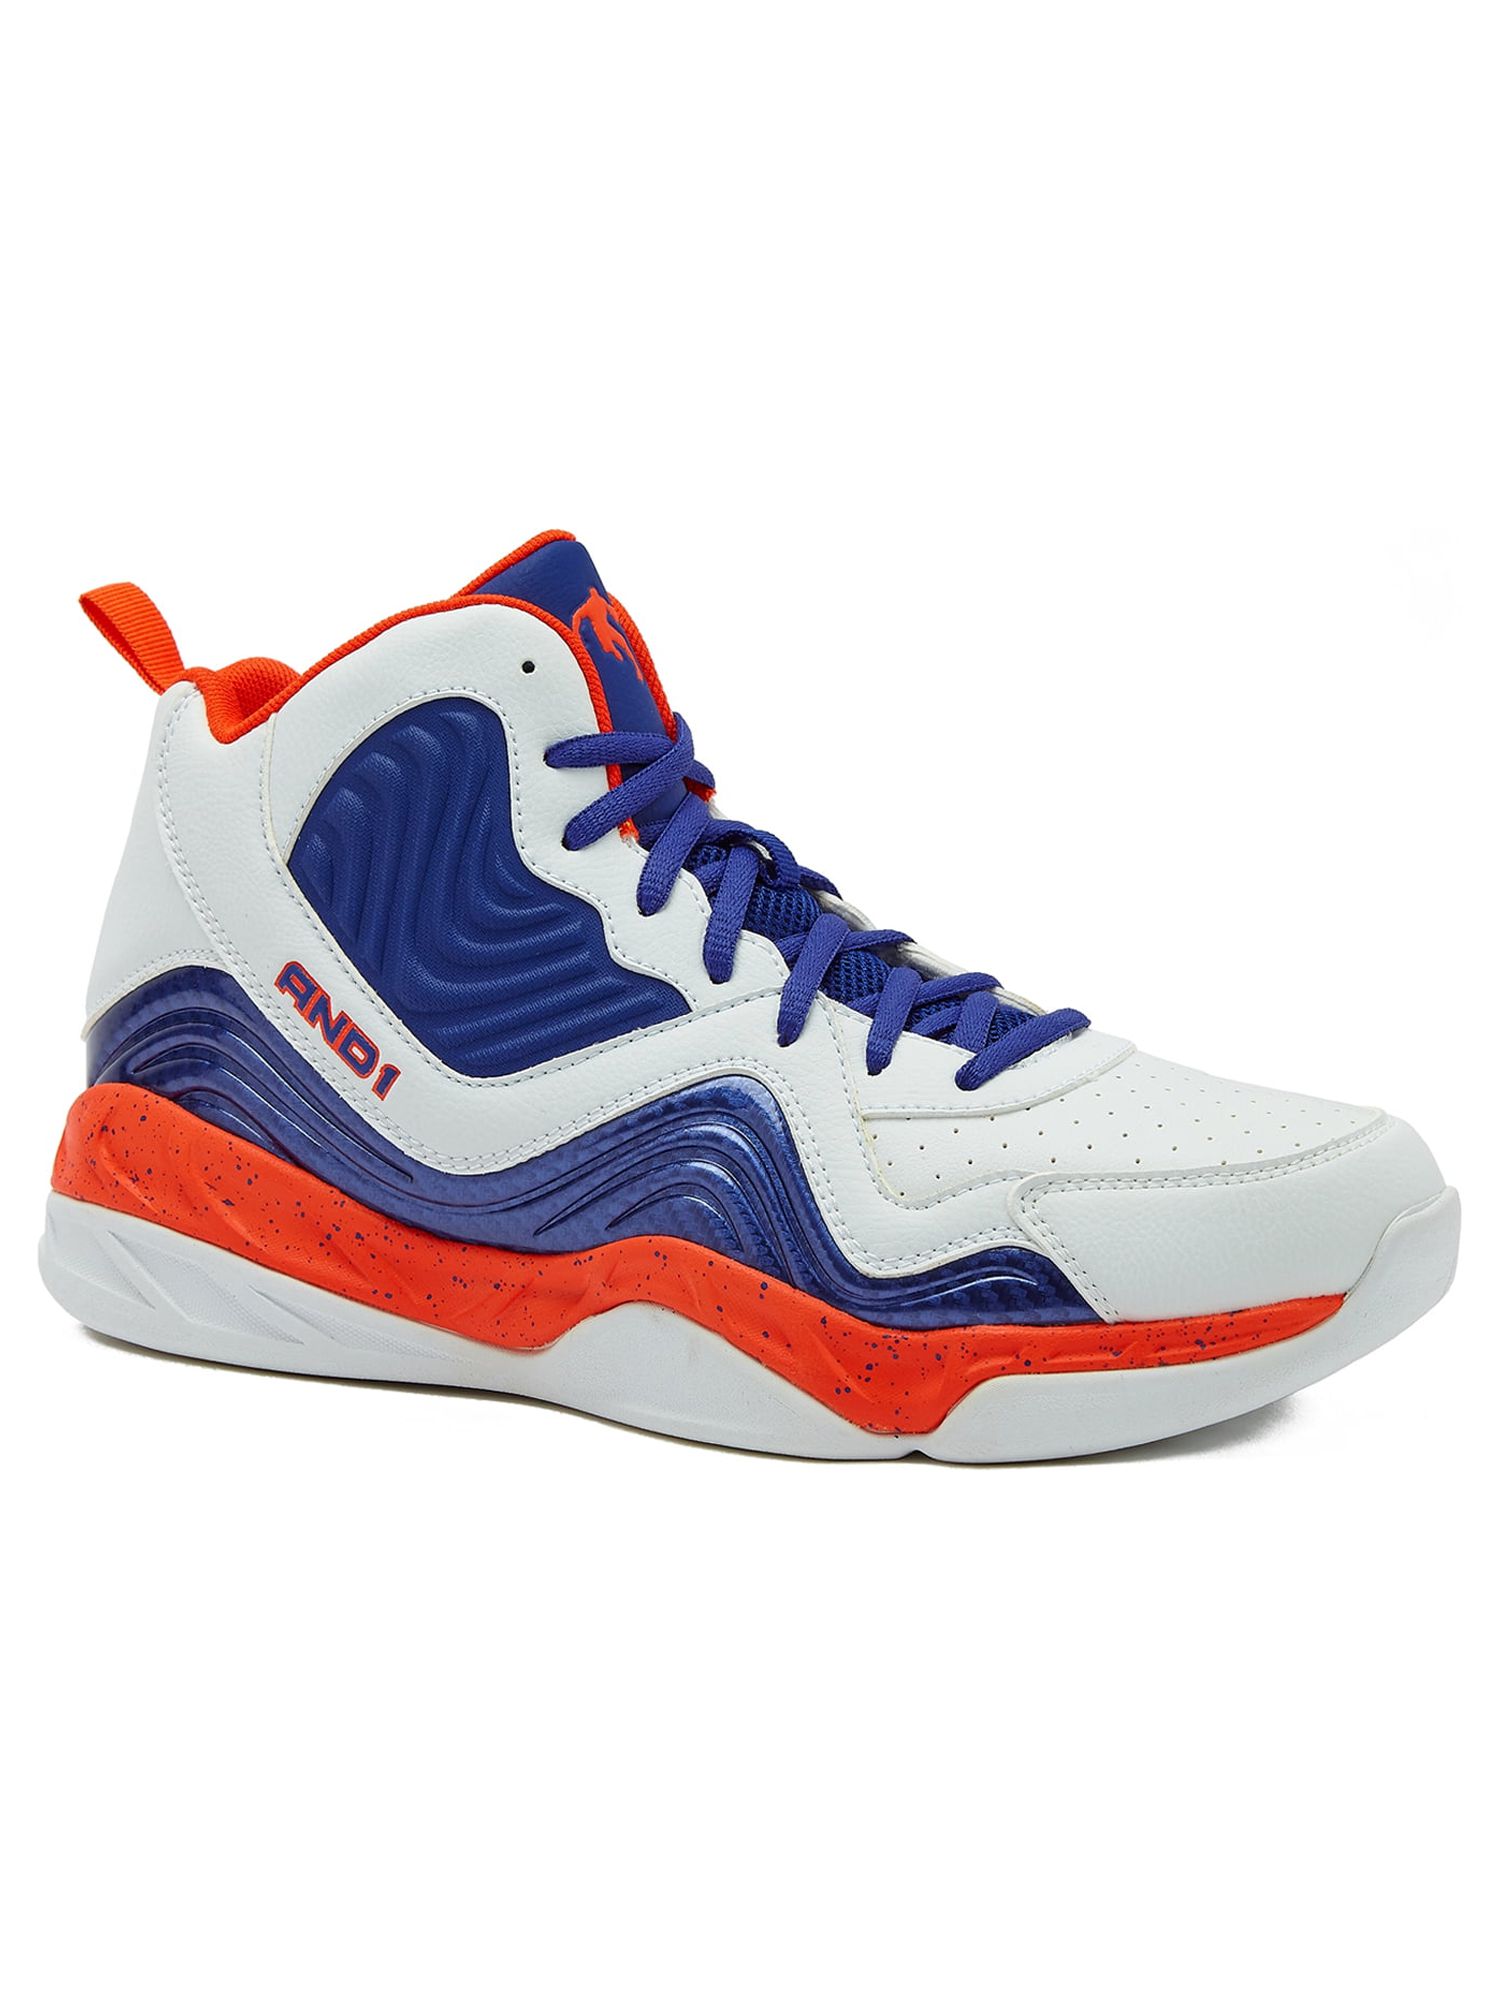 AND1 Men's Maverick Basketball High-Top Sneakers - image 1 of 5